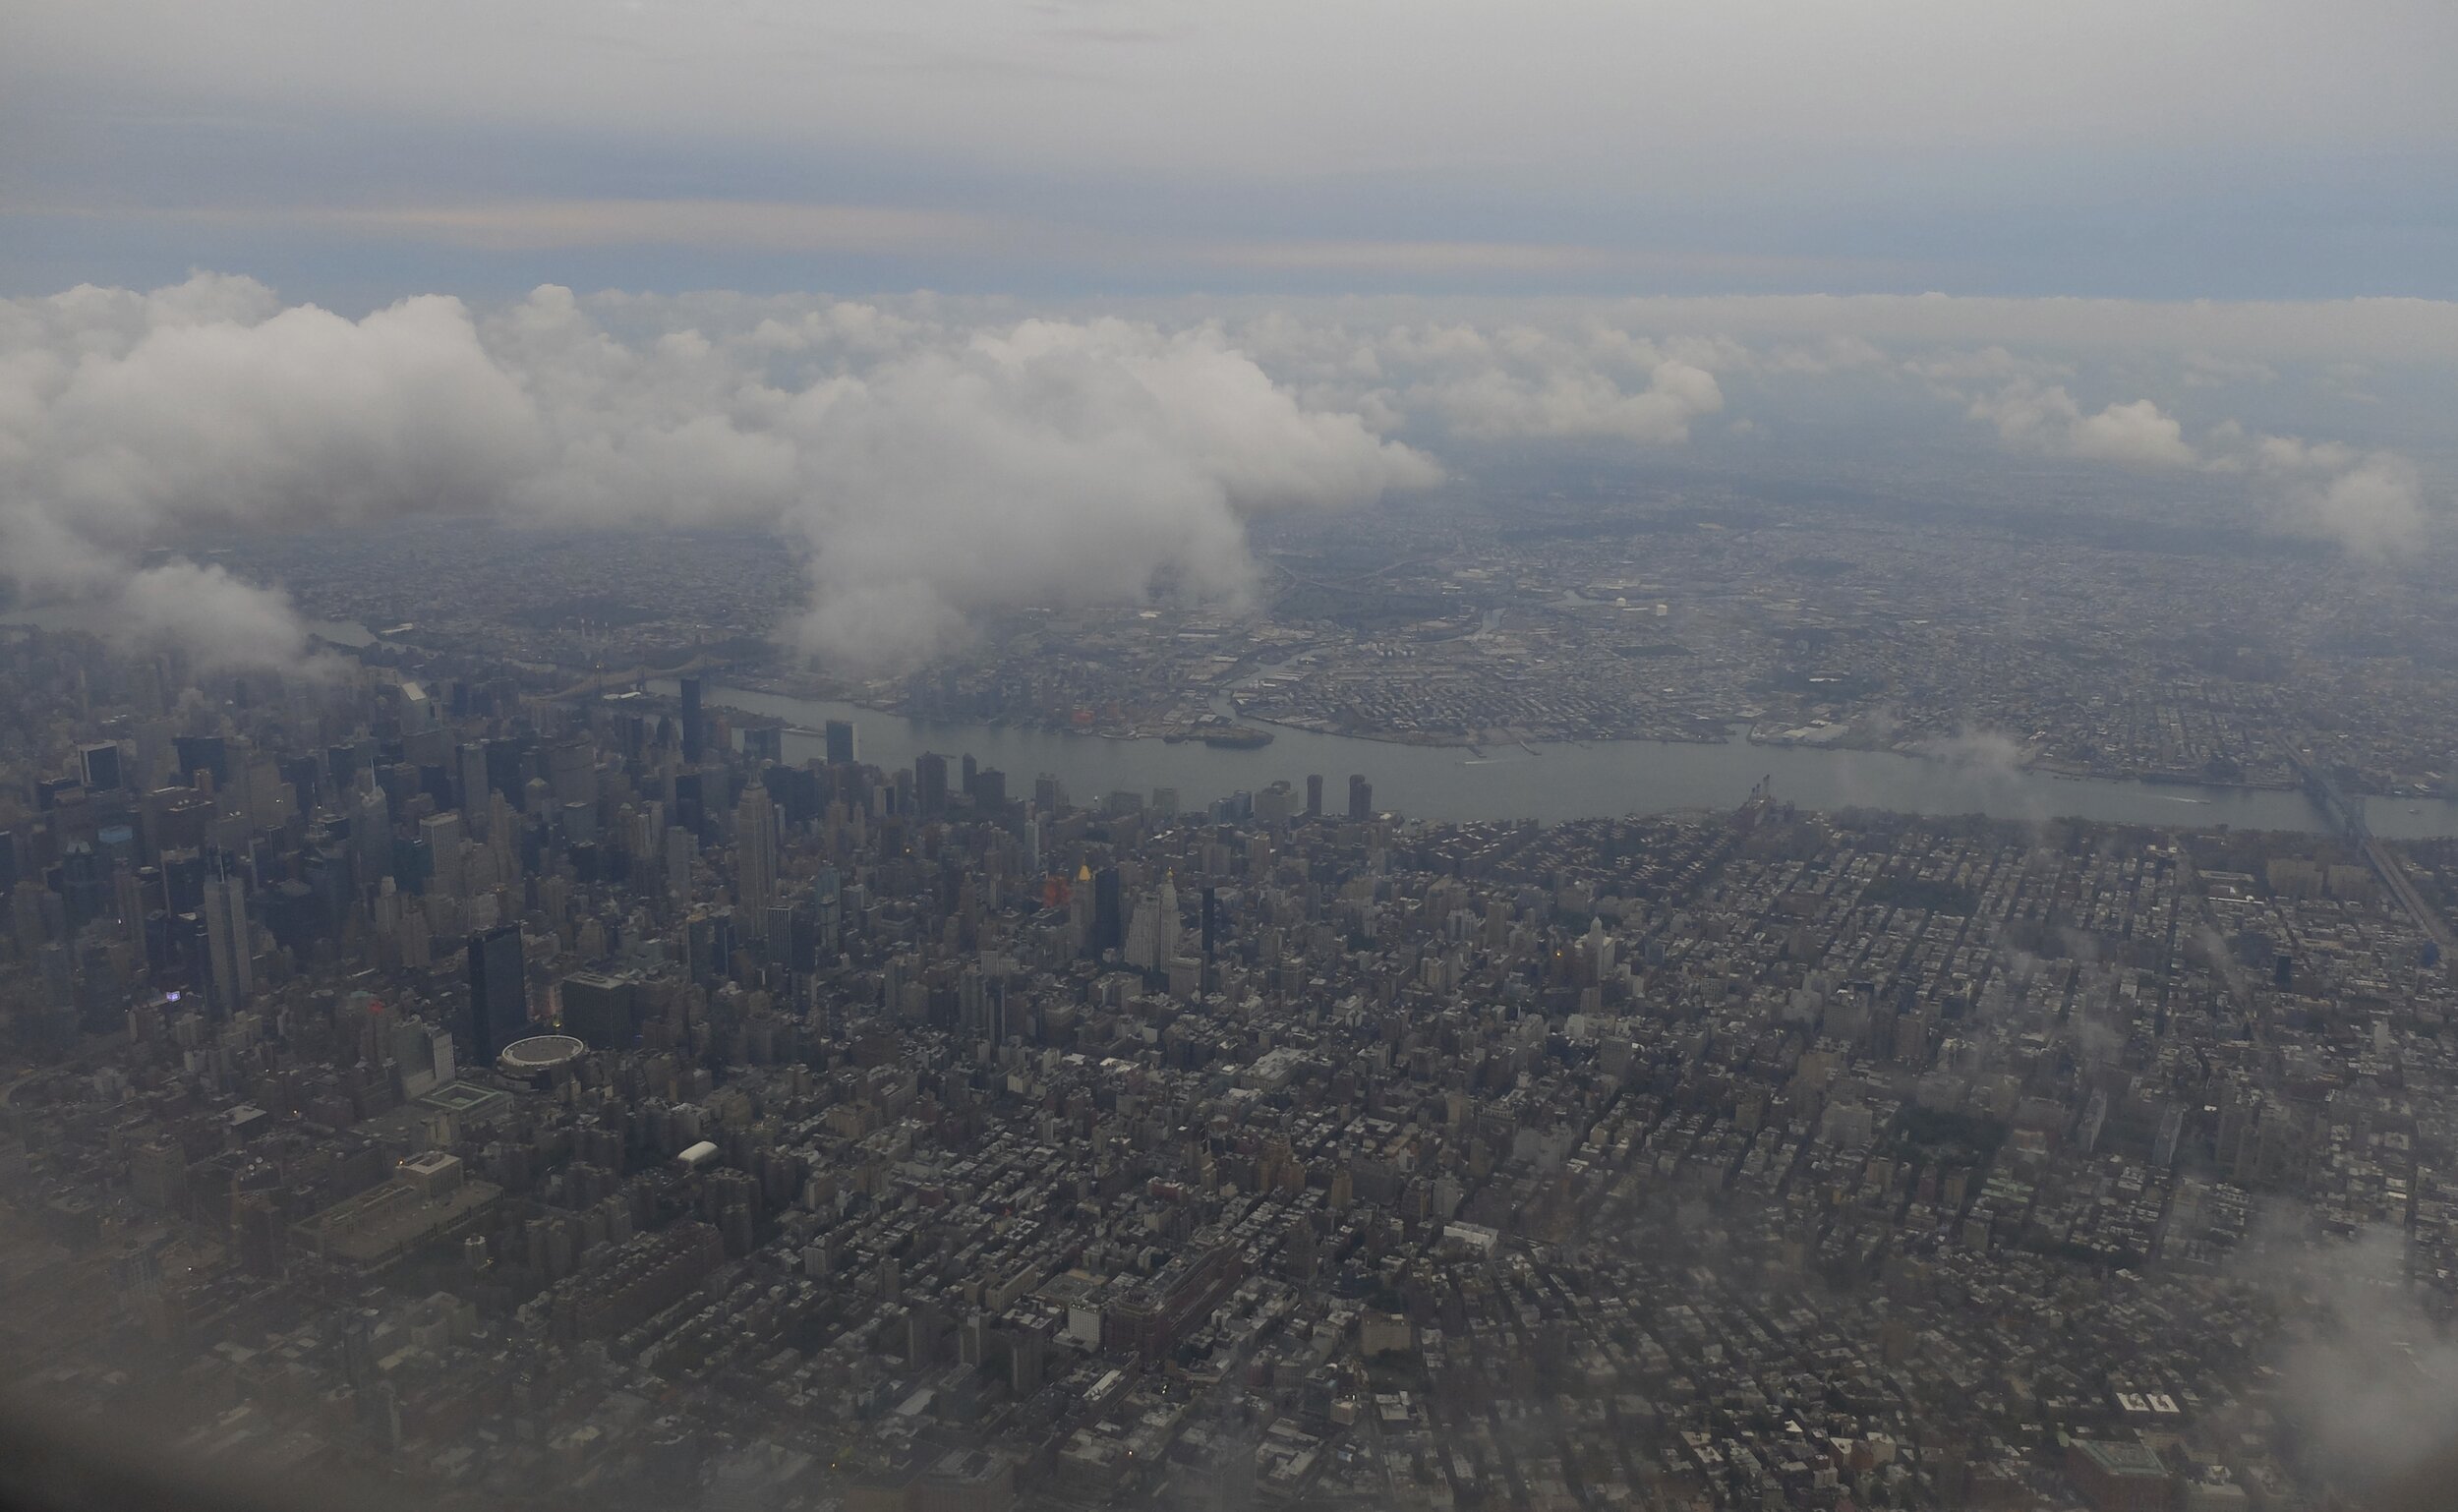 And in Oct. 2013, from the approach to LaGuardia airport.  The cloud, over the East River, is pointing to the U.N. Bldg. &amp; to the left, 432 Park Ave.